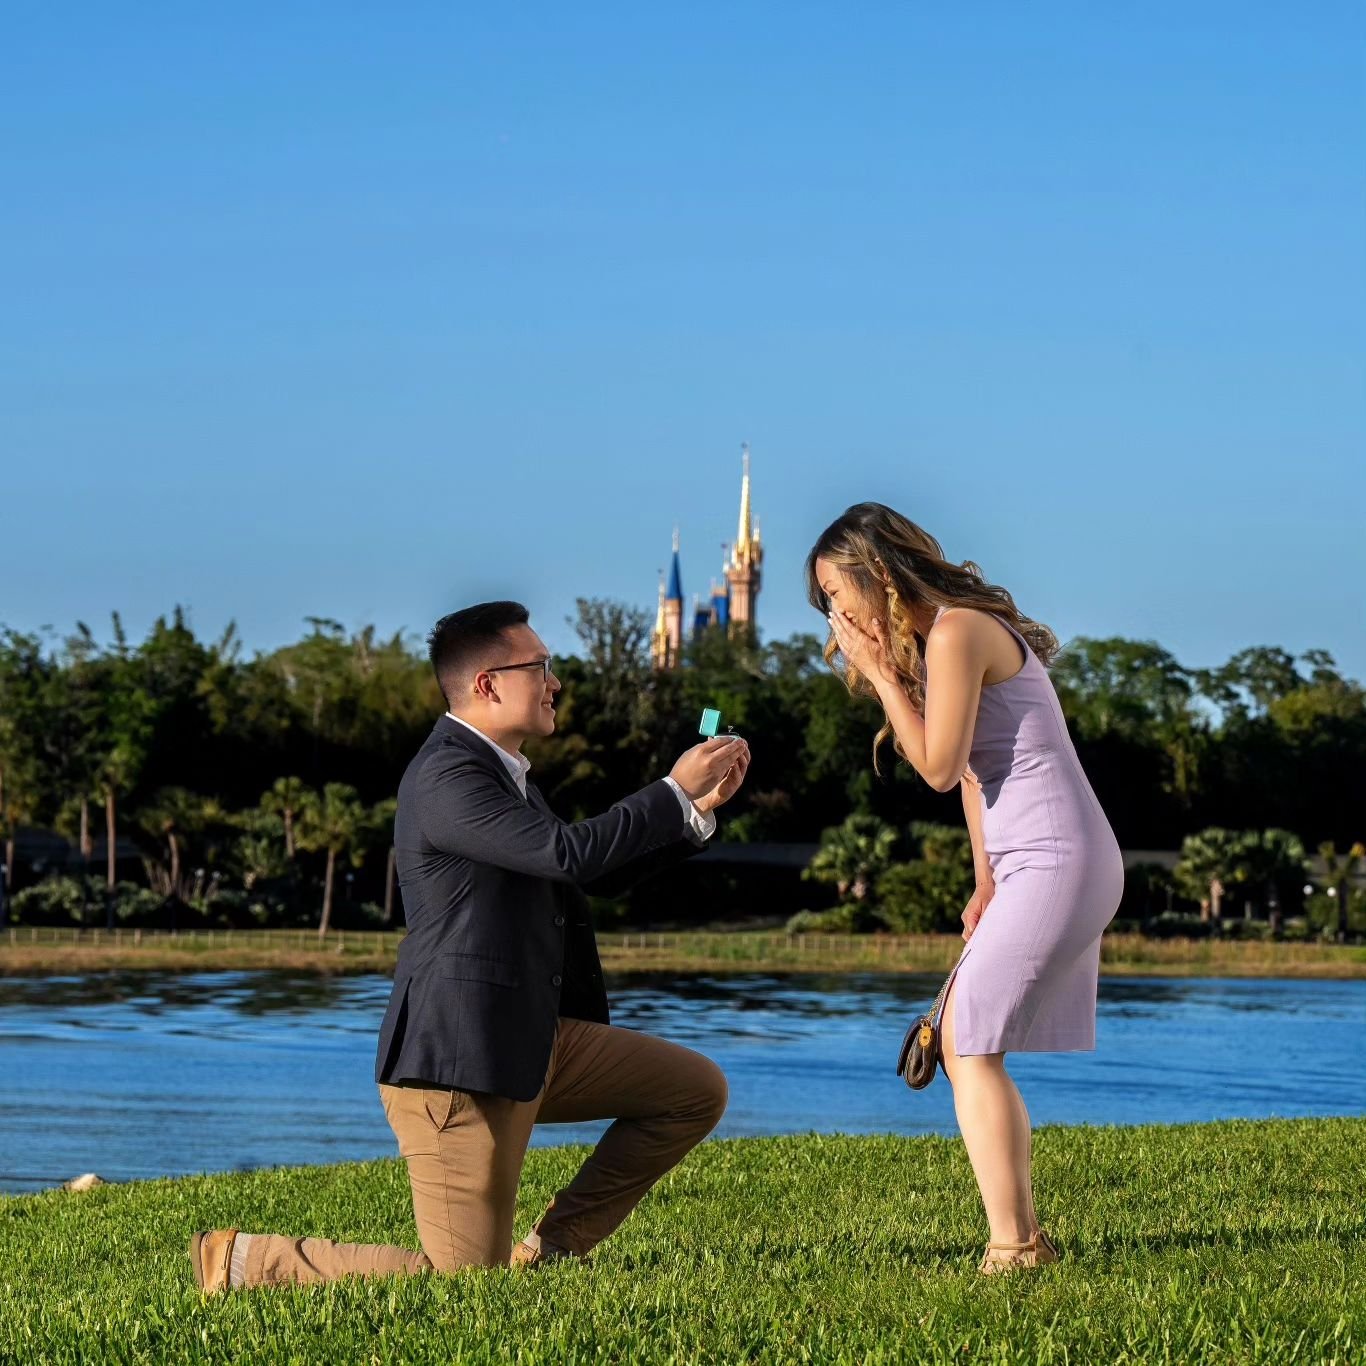 《 That Disney magic! Fellas, when you propose, make sure you hire a pro. We can help out with planning and find you the perfect spot to pop that important question! 💍✨️ 》
.
.
.
#bridetobe2025 #bridetobe #disneyproposal #disneyaddict #weddingphotogra